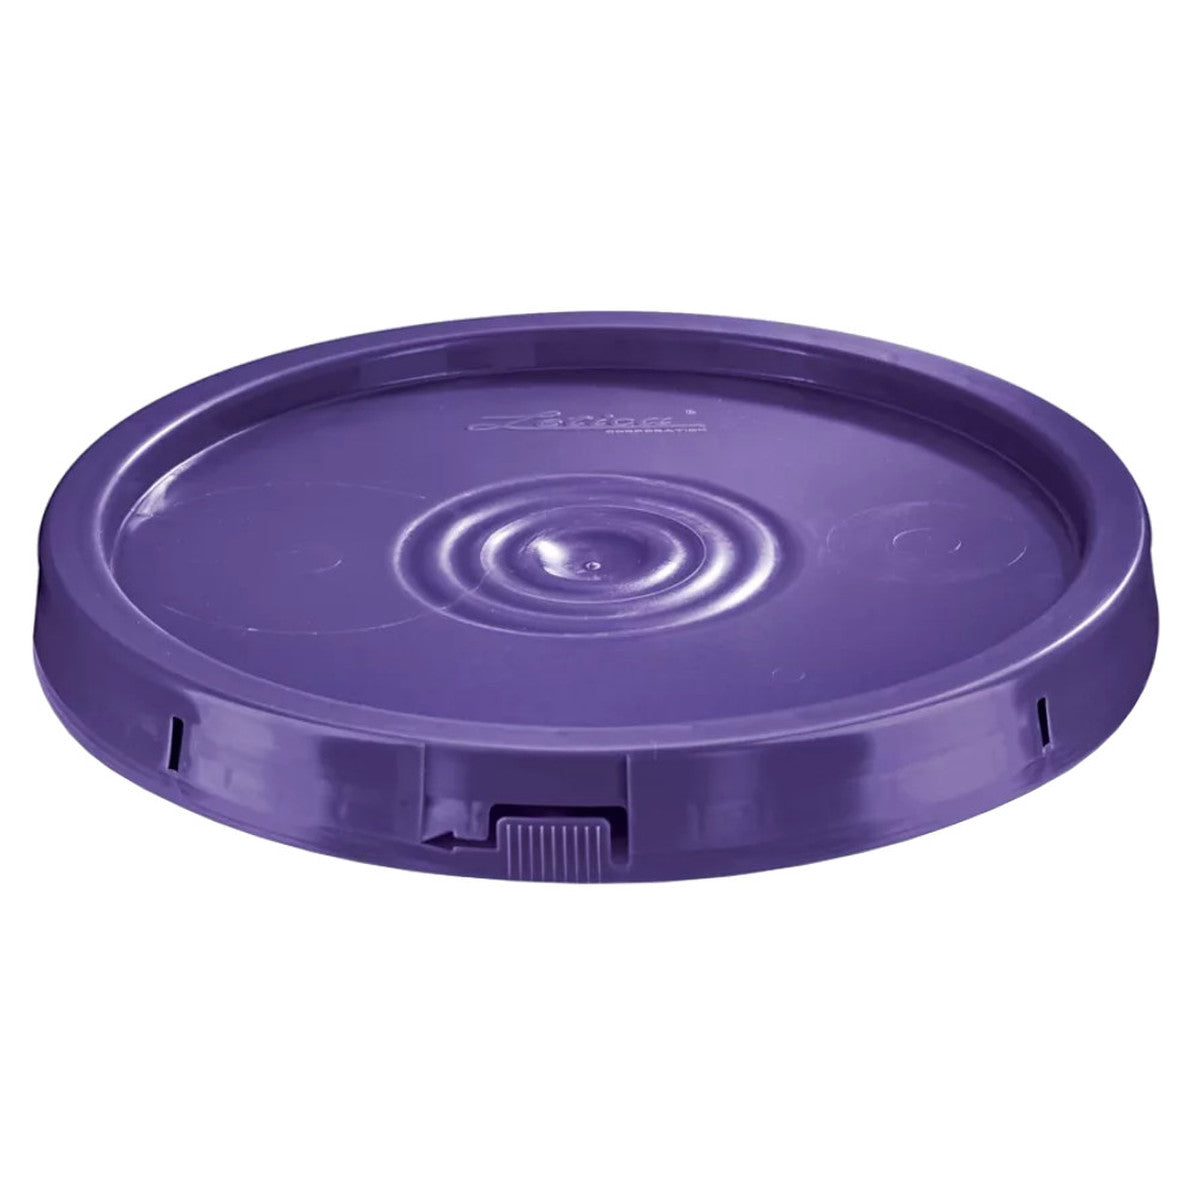 Lid for 5 Gallon or 3 1/2 Gallon Round Buckets